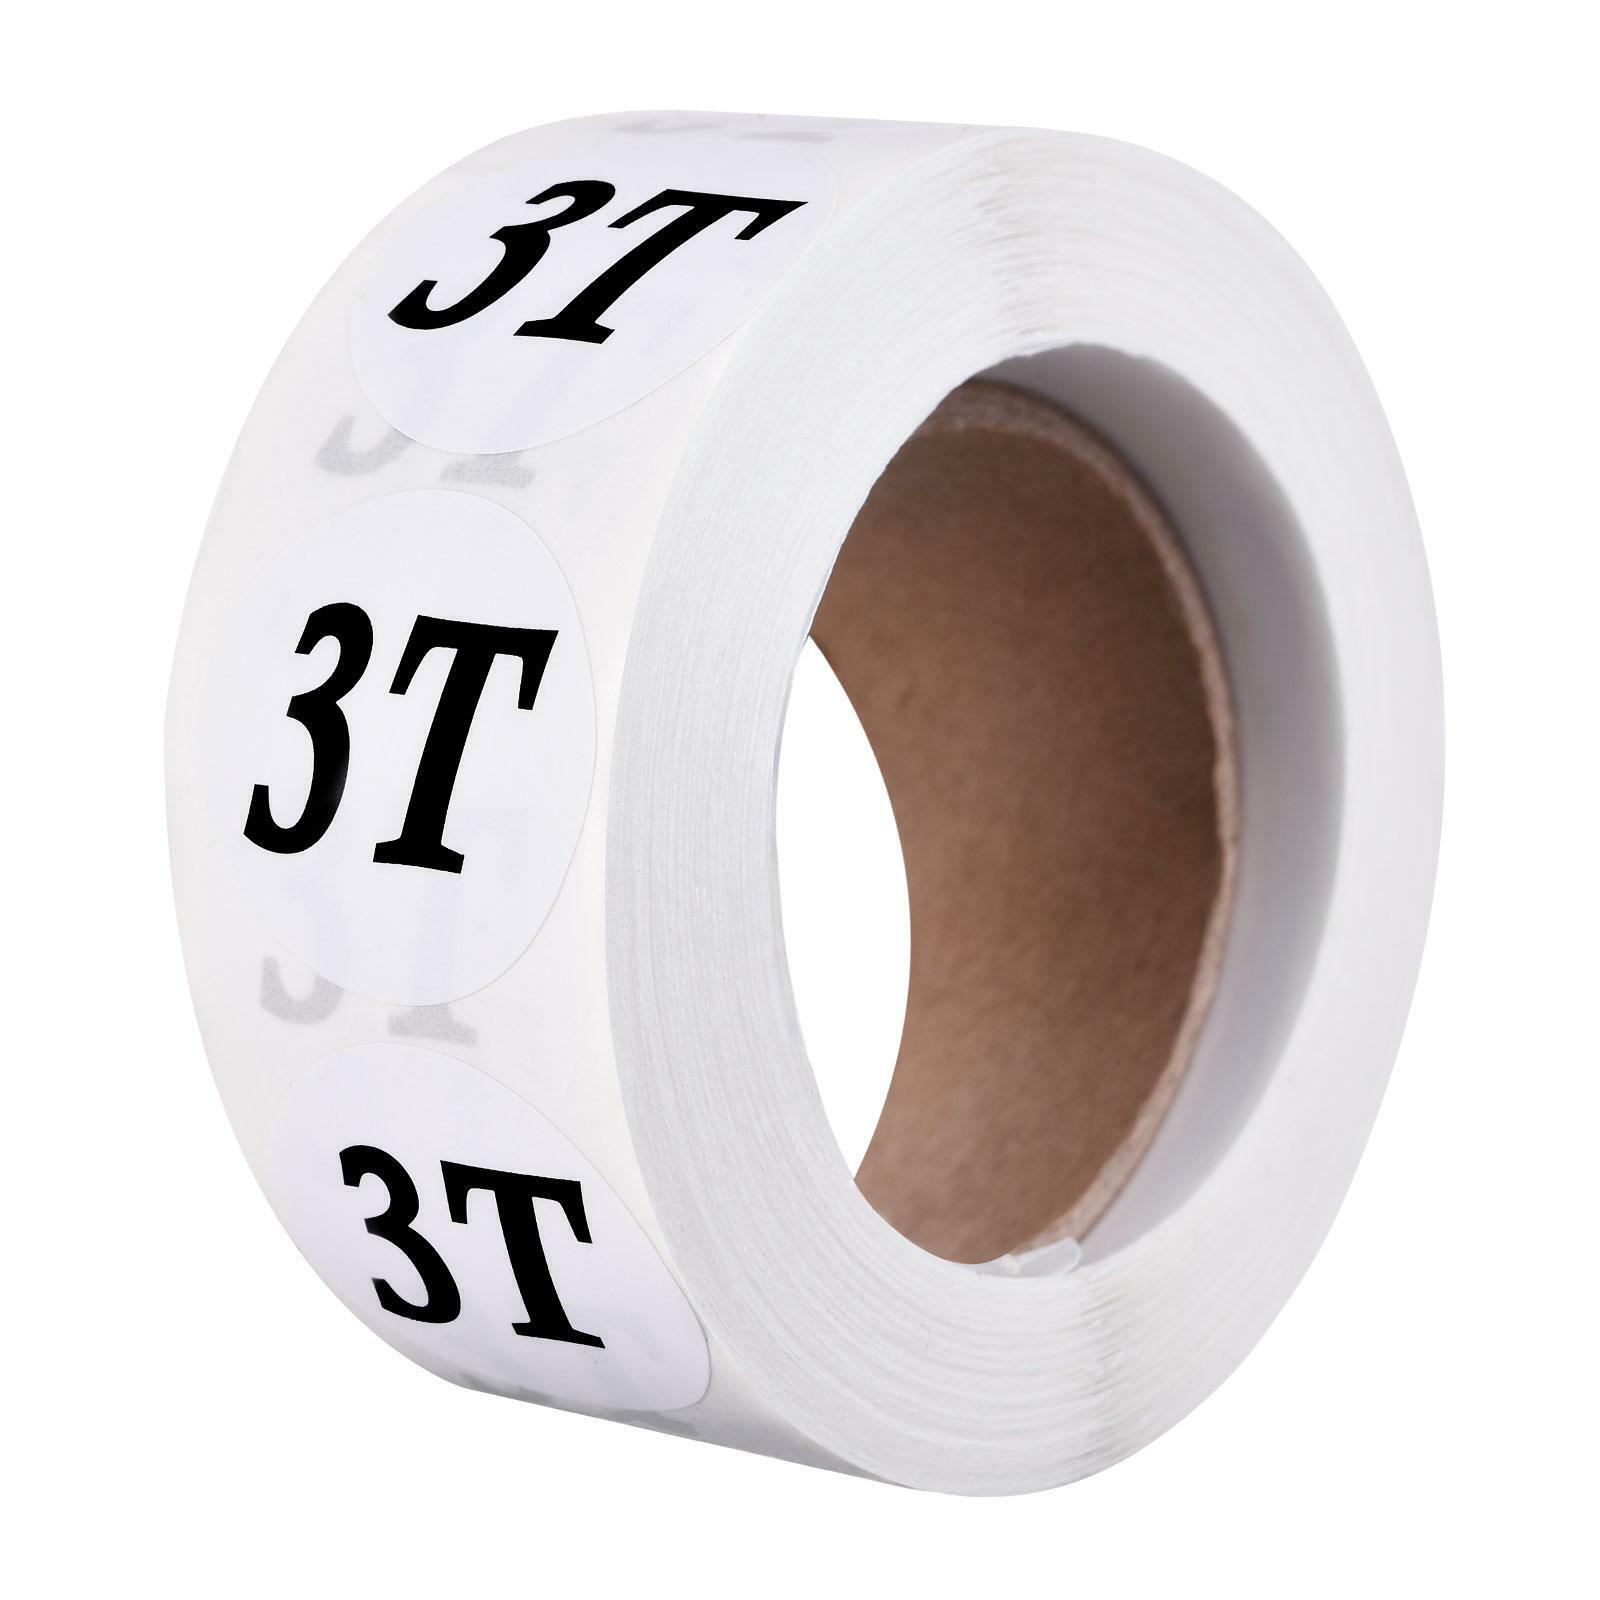 Clothing 3t Size Sticker Label Coding Label 25mm/1inch Dia 1 Roll 500 Labels